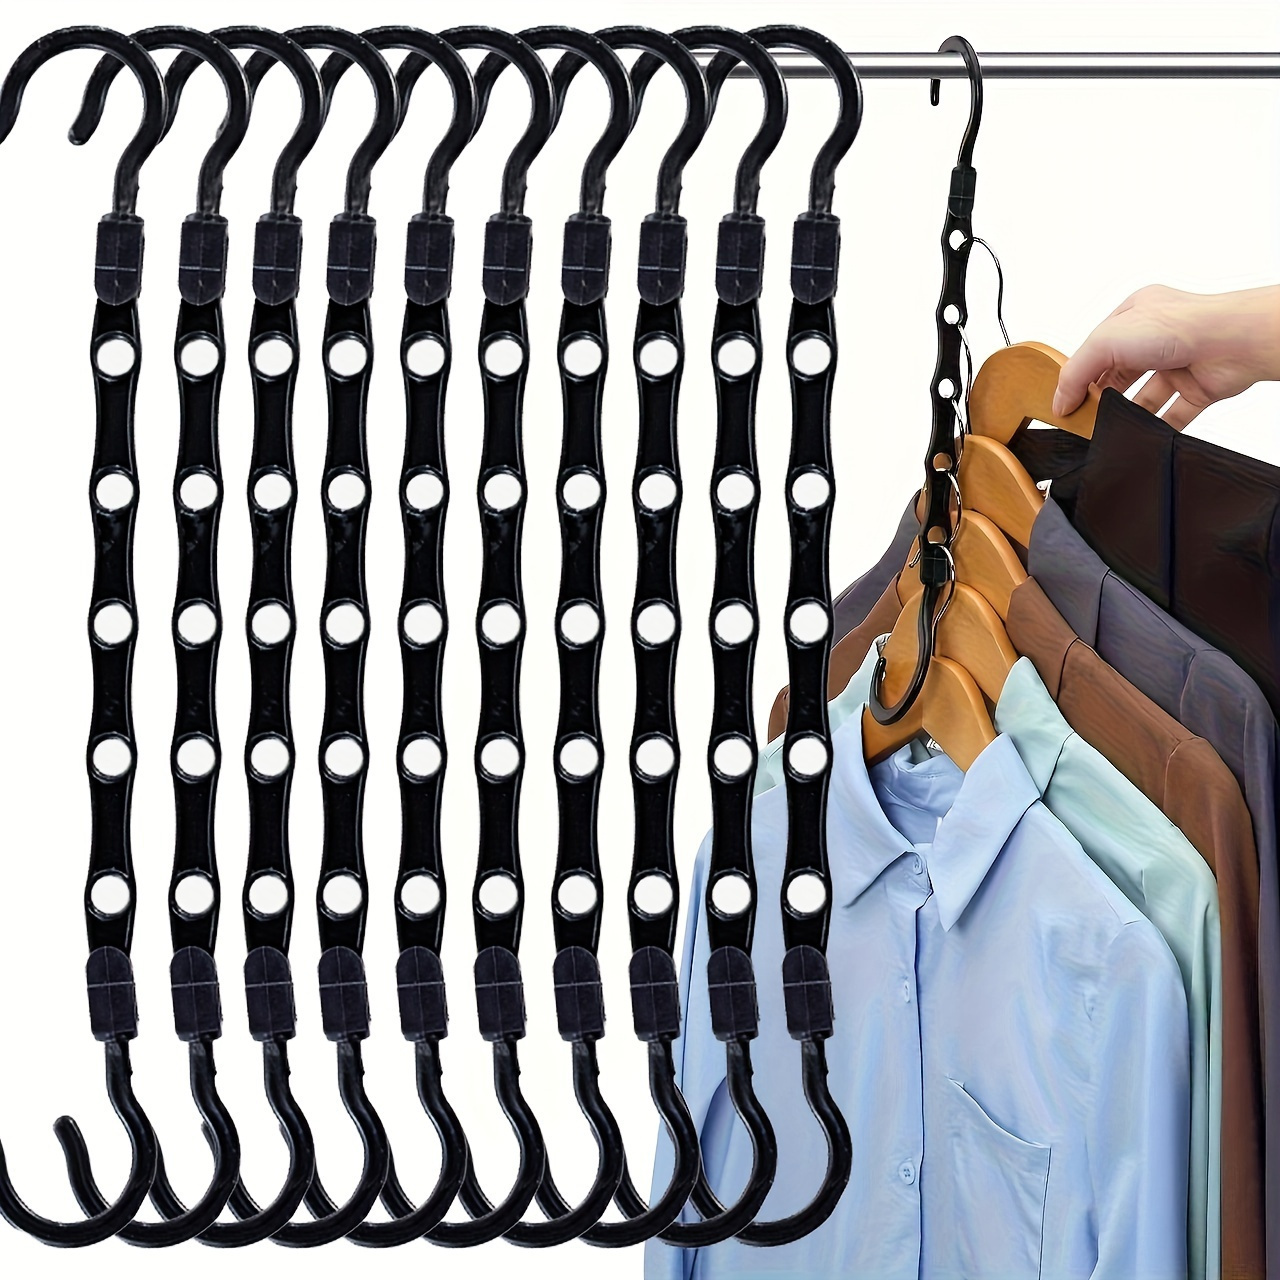 

10pcs Magic Clothes Hangers, Space Saving Hangers, Closet Hanger Organizer Multi Hangers, Sturdy Plastic, For Heavy Clothes Storage, For Clothing Stores